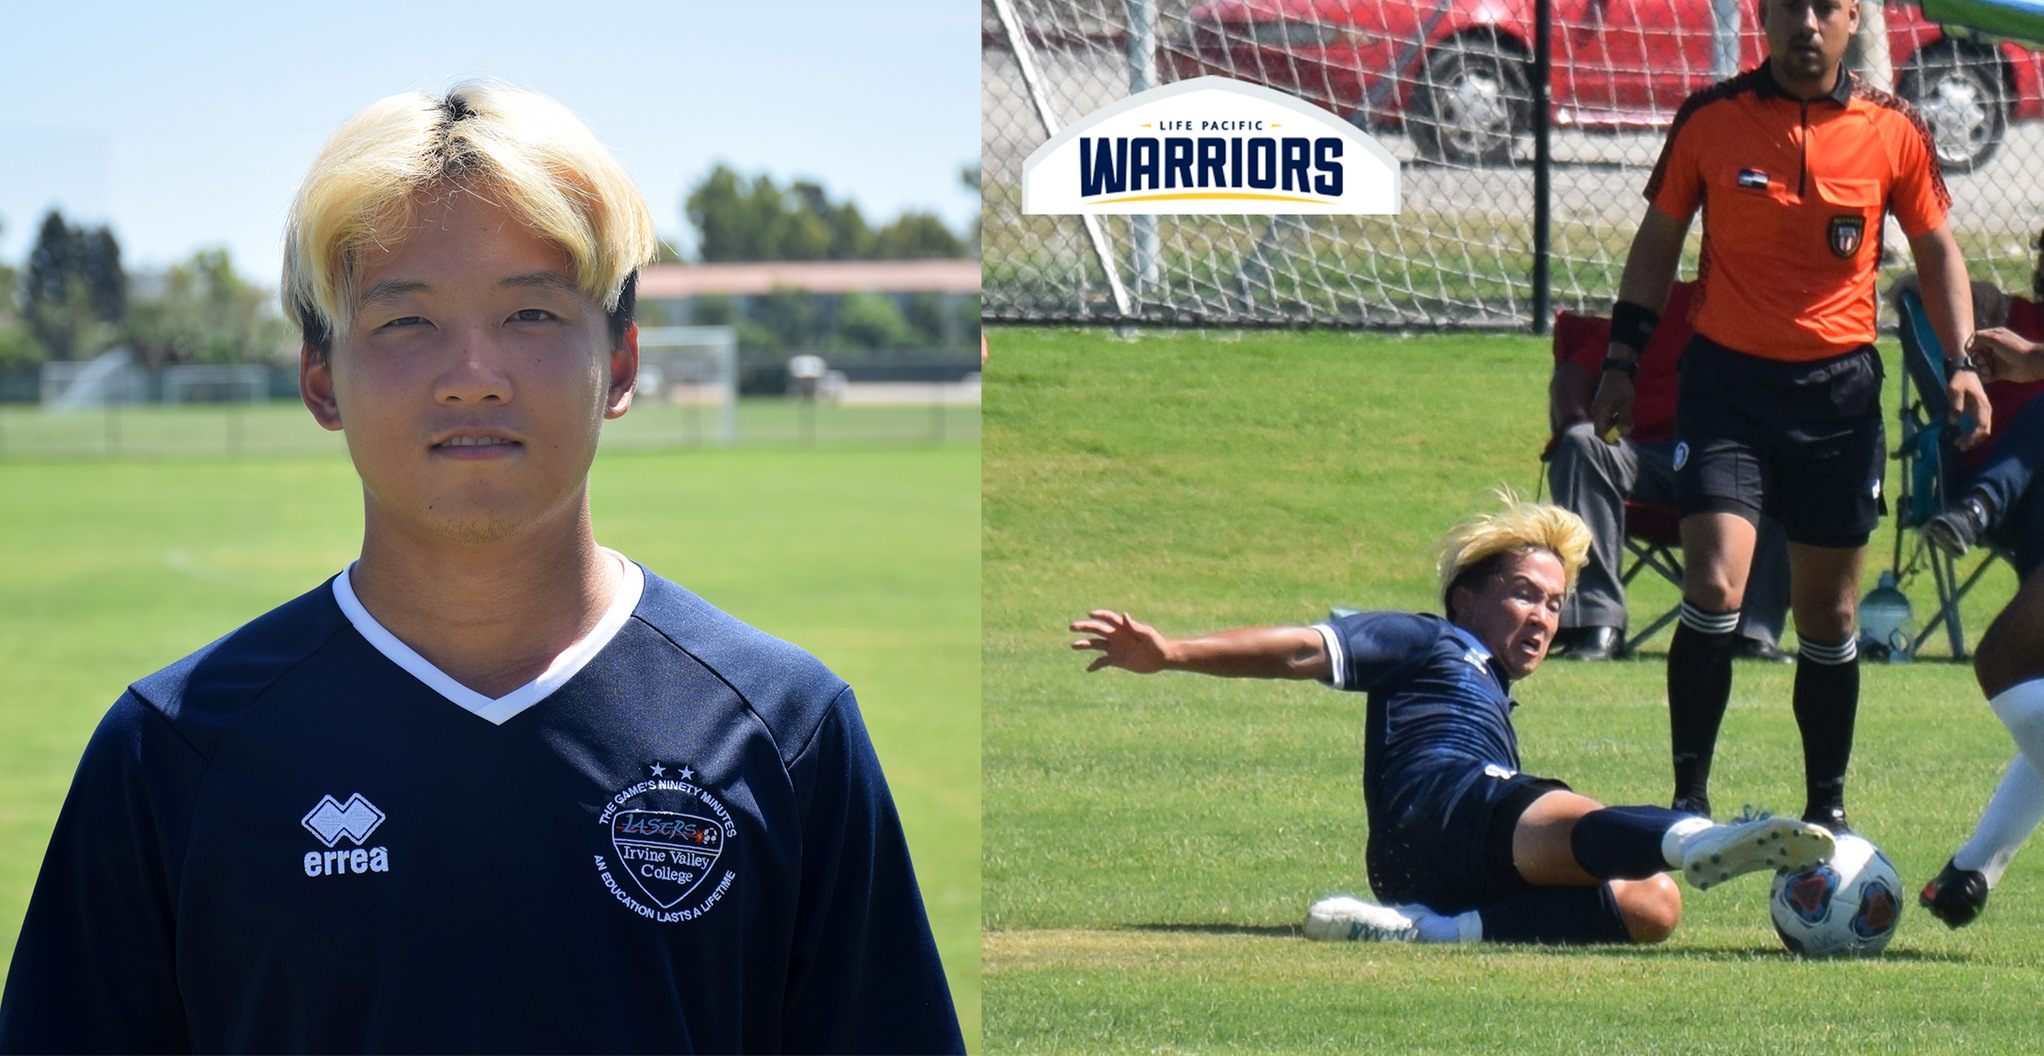 Gibae Kim makes it three soccer players headed to Life Pacific